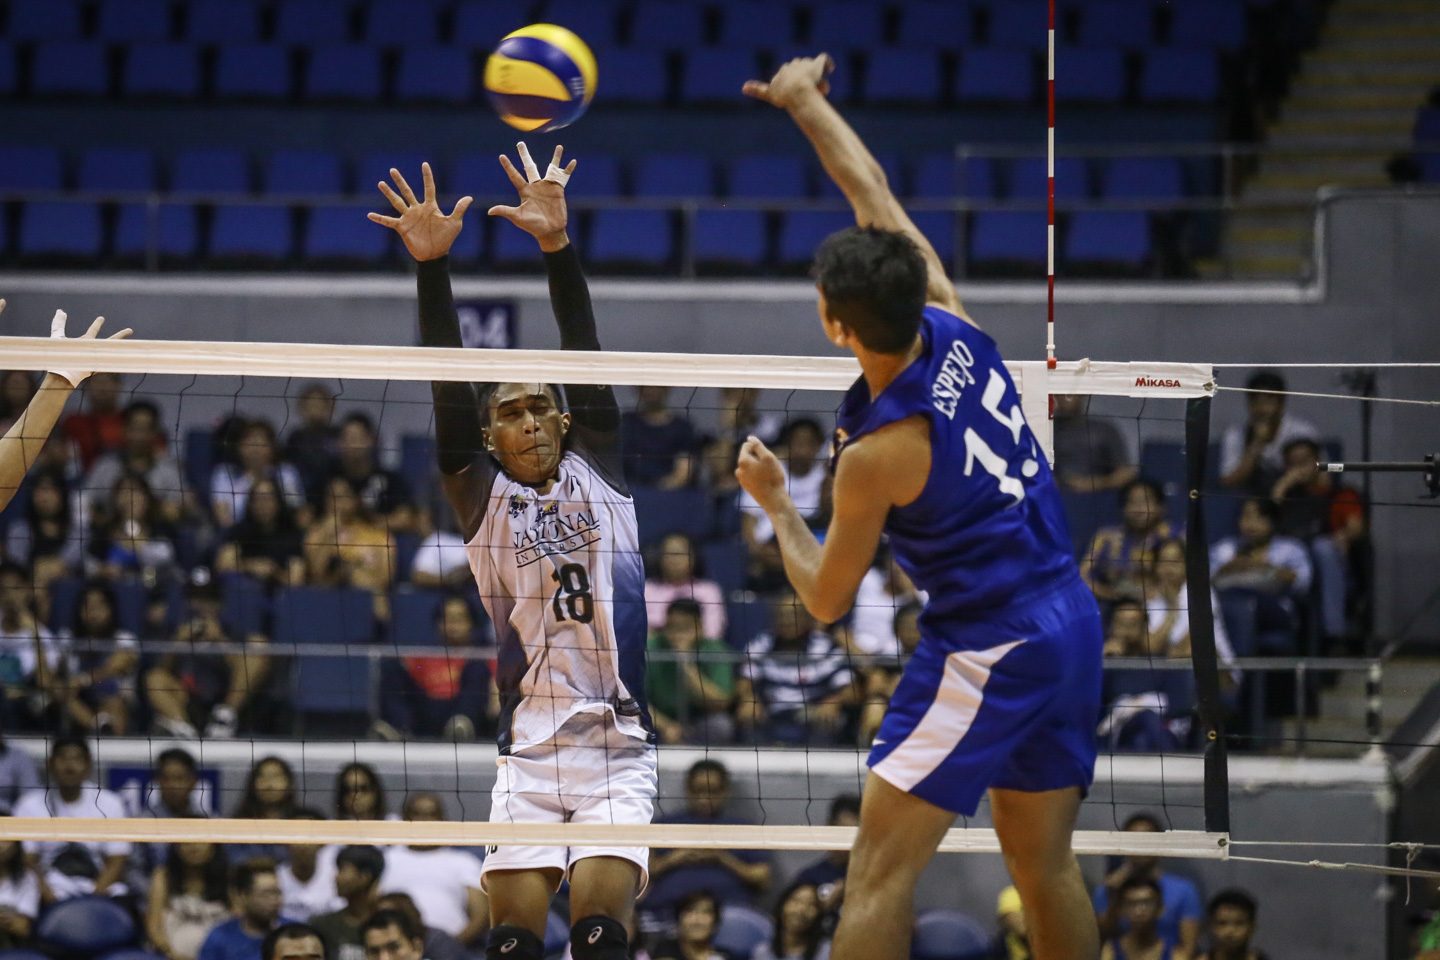 Madz Gampong proves to be NU’s secret weapon against Ateneo